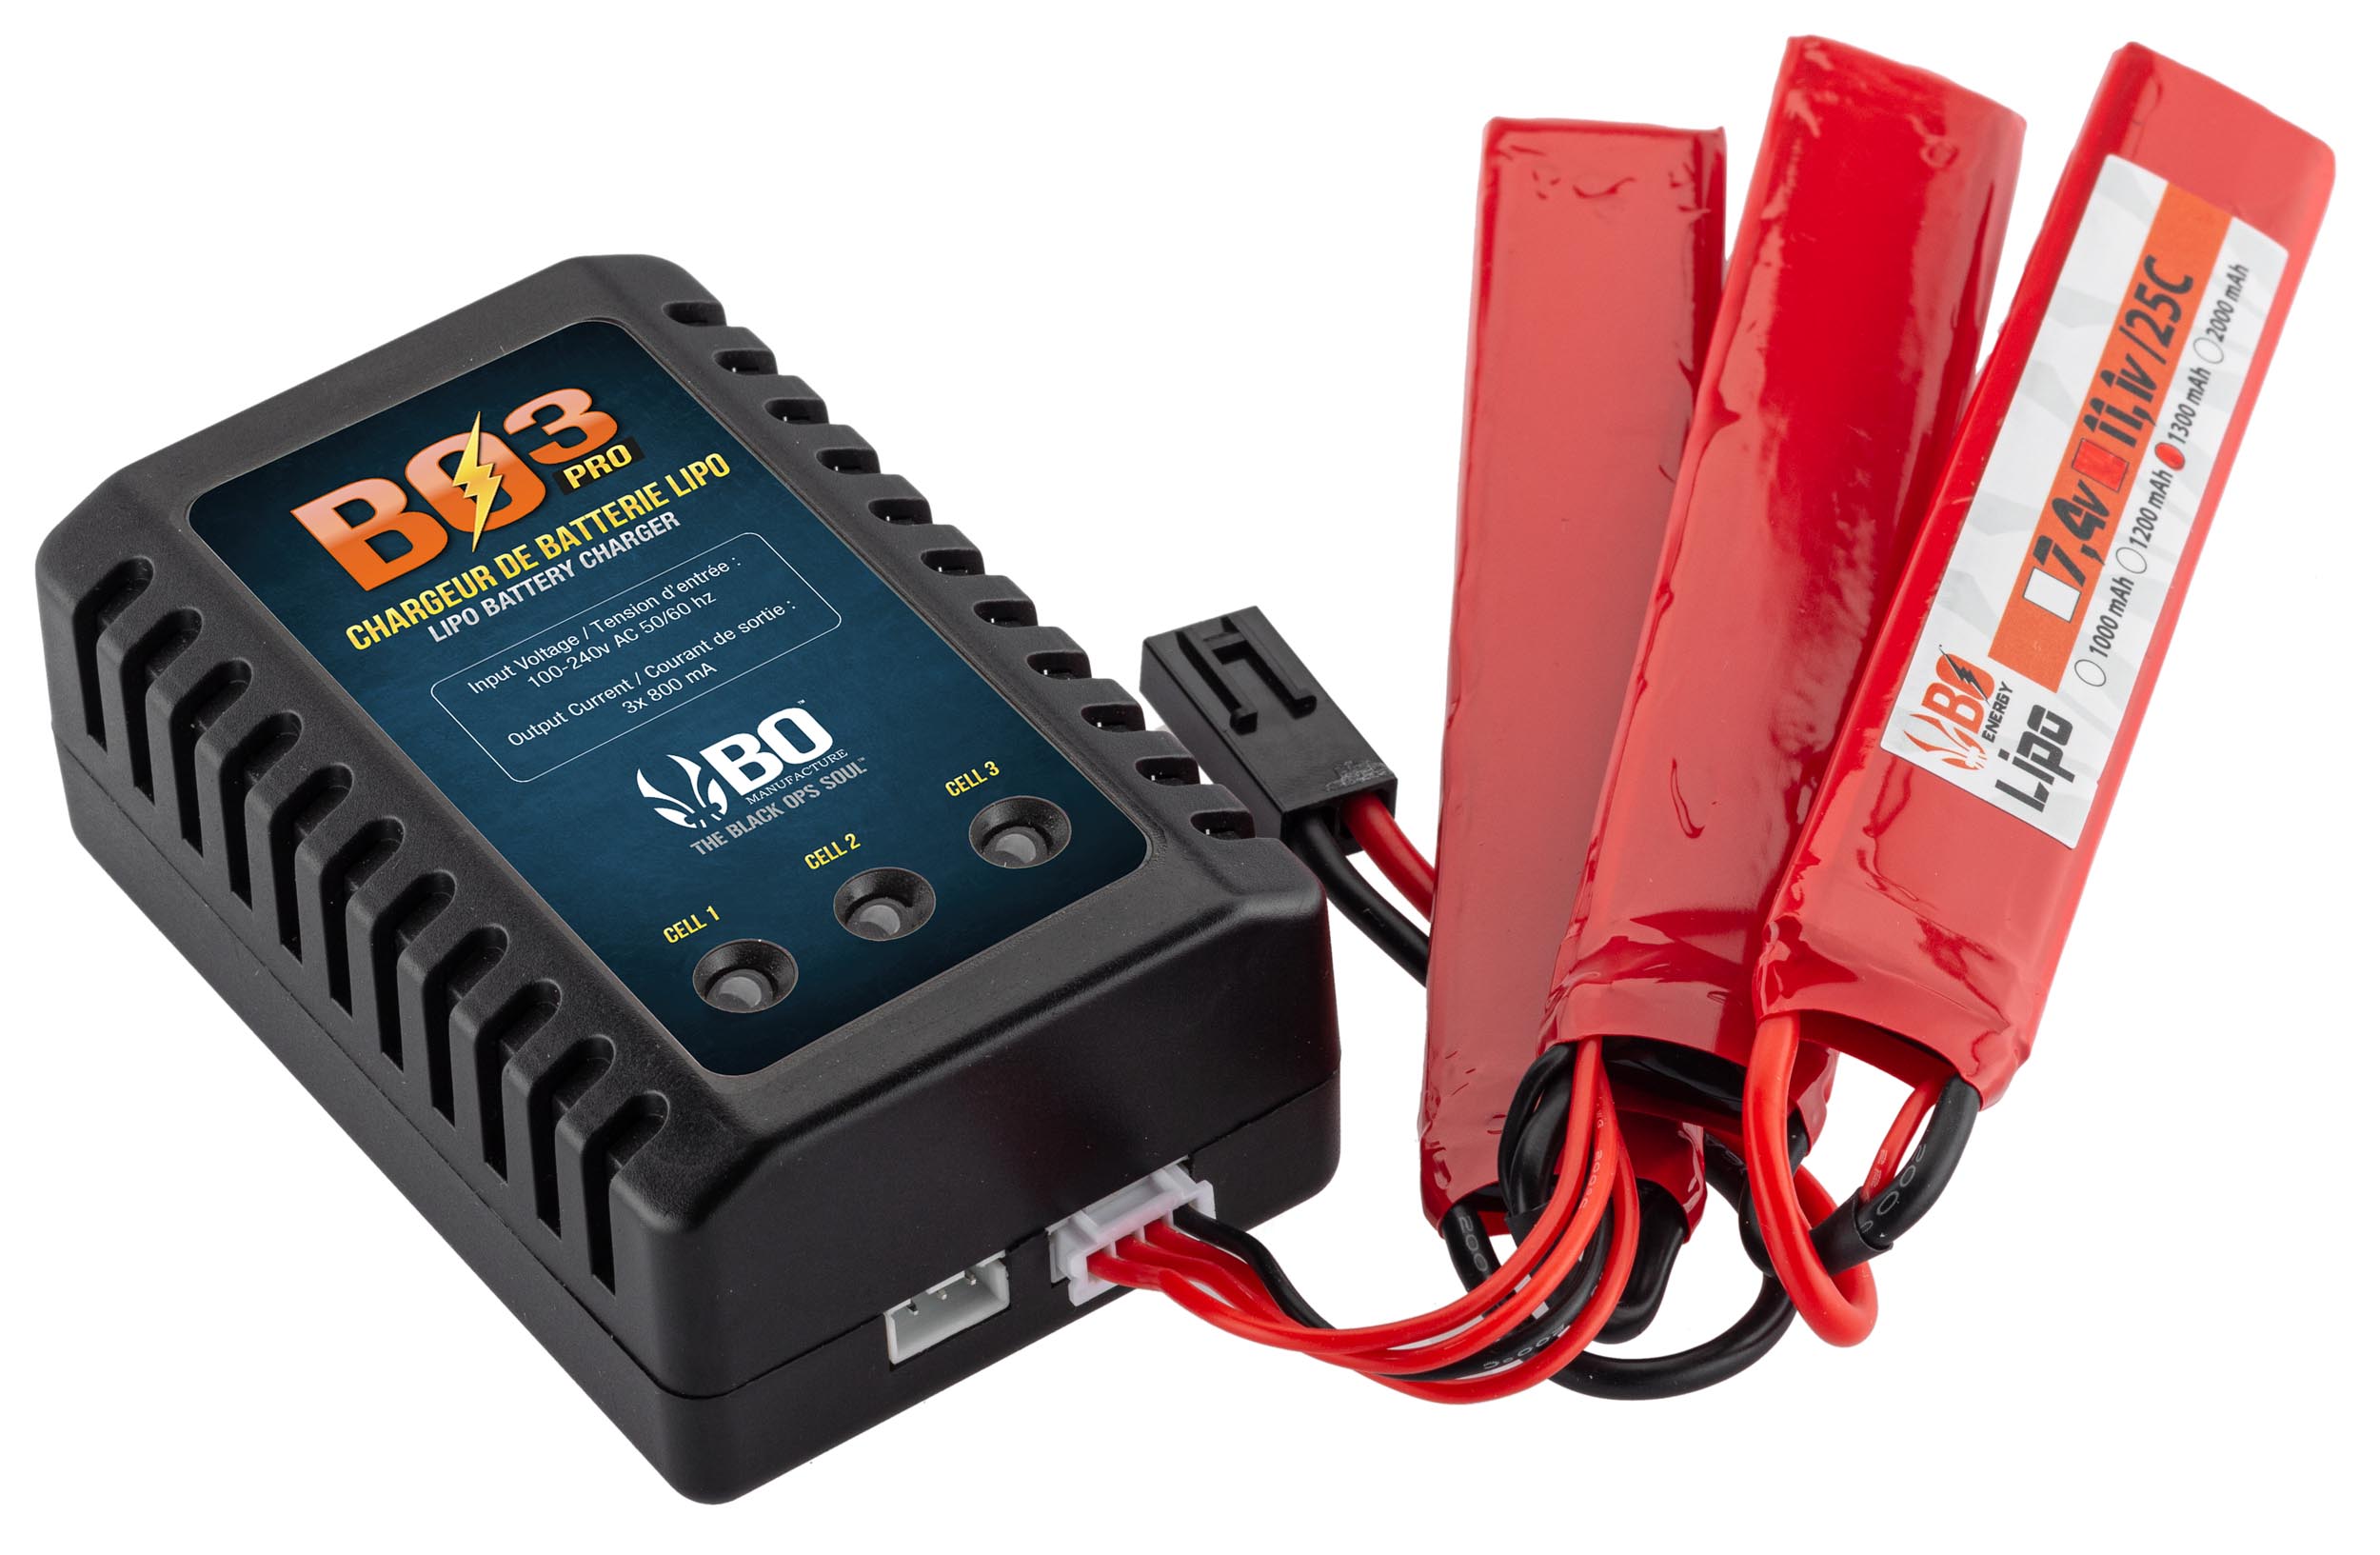 BO3 battery charger for  and  LiPo batteries